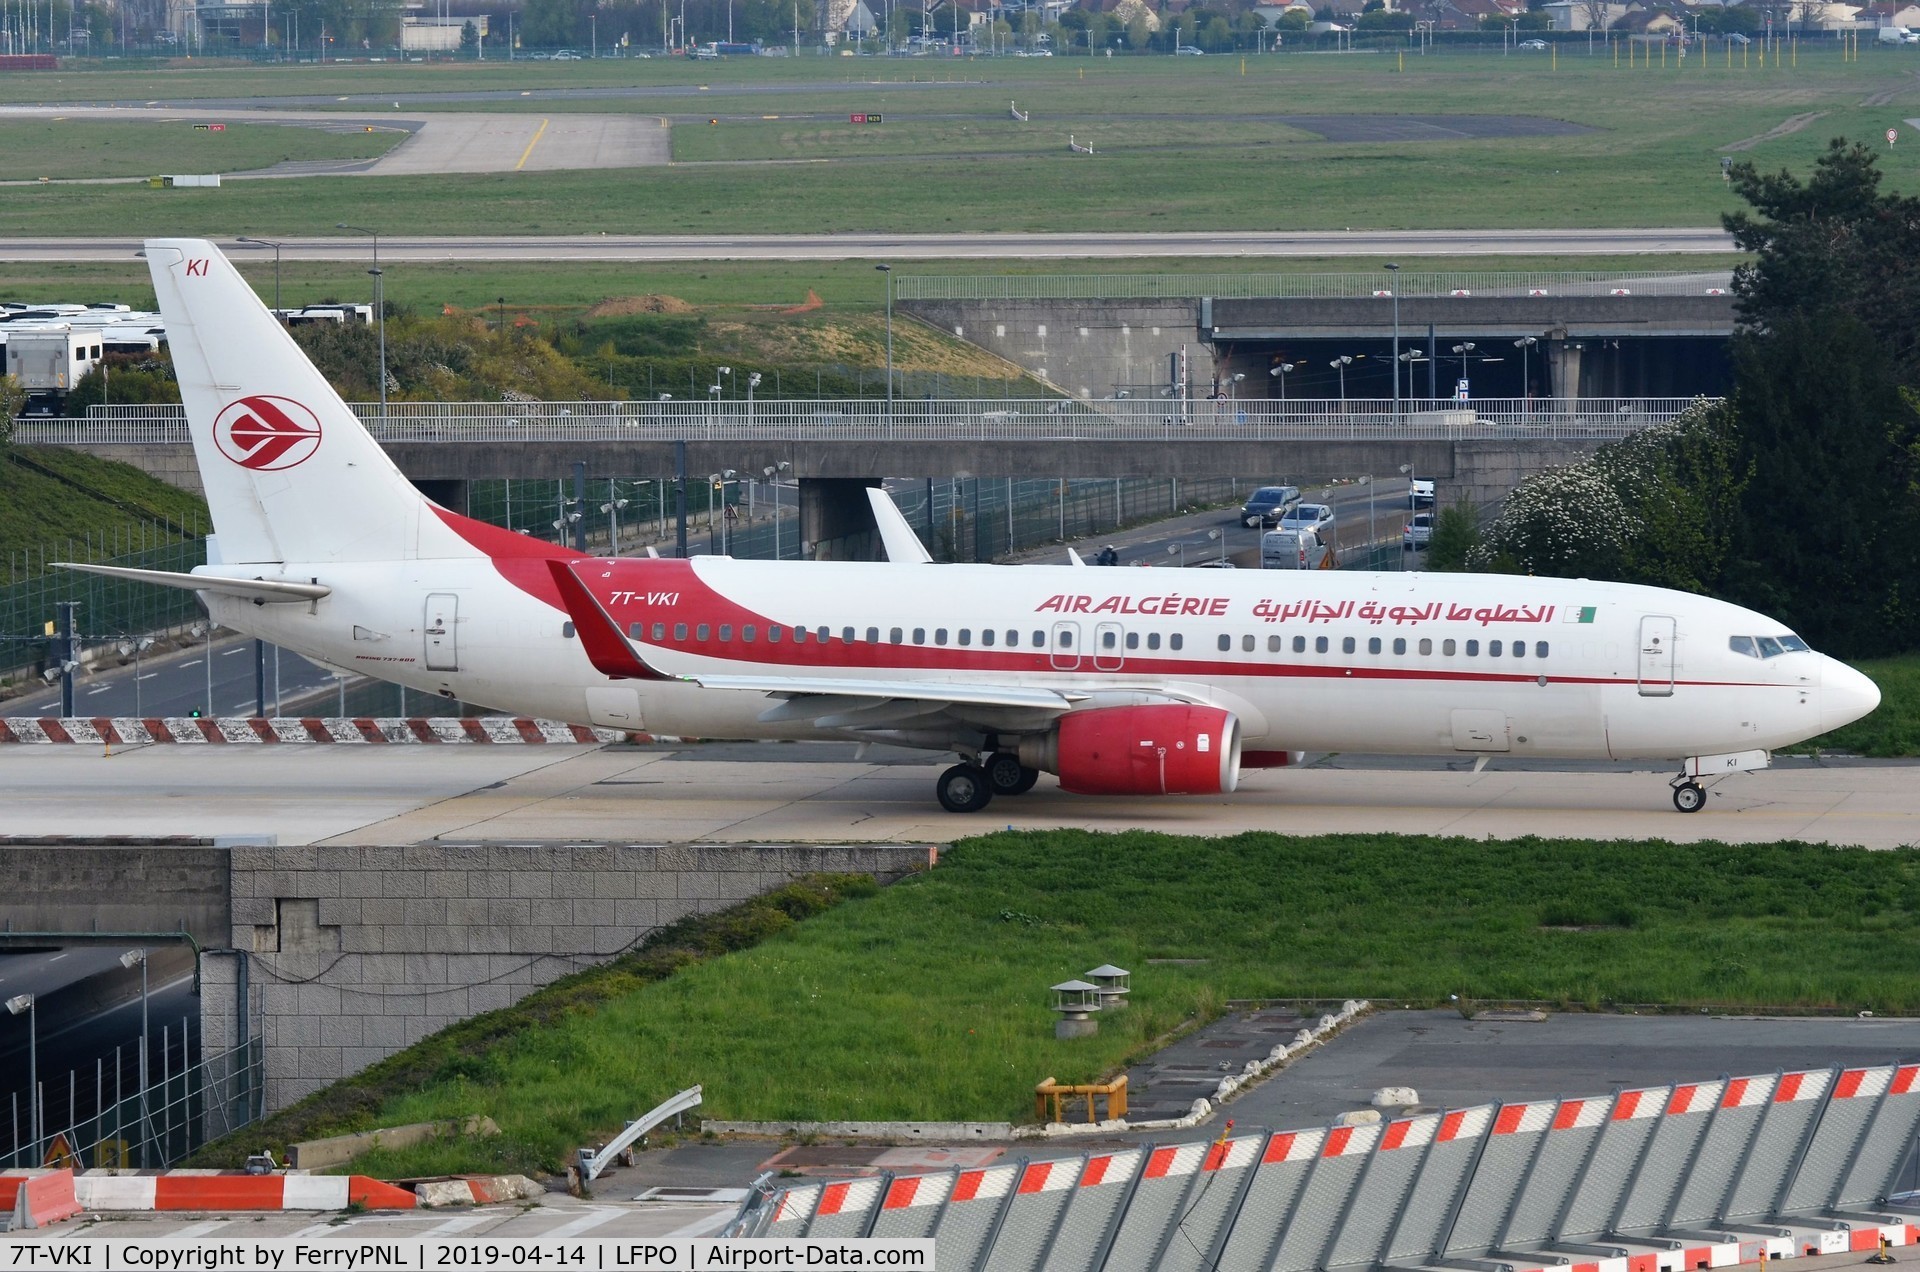 7T-VKI, 2011 Boeing 737-8D6 C/N 40863, Air Algerie B738 taxying out